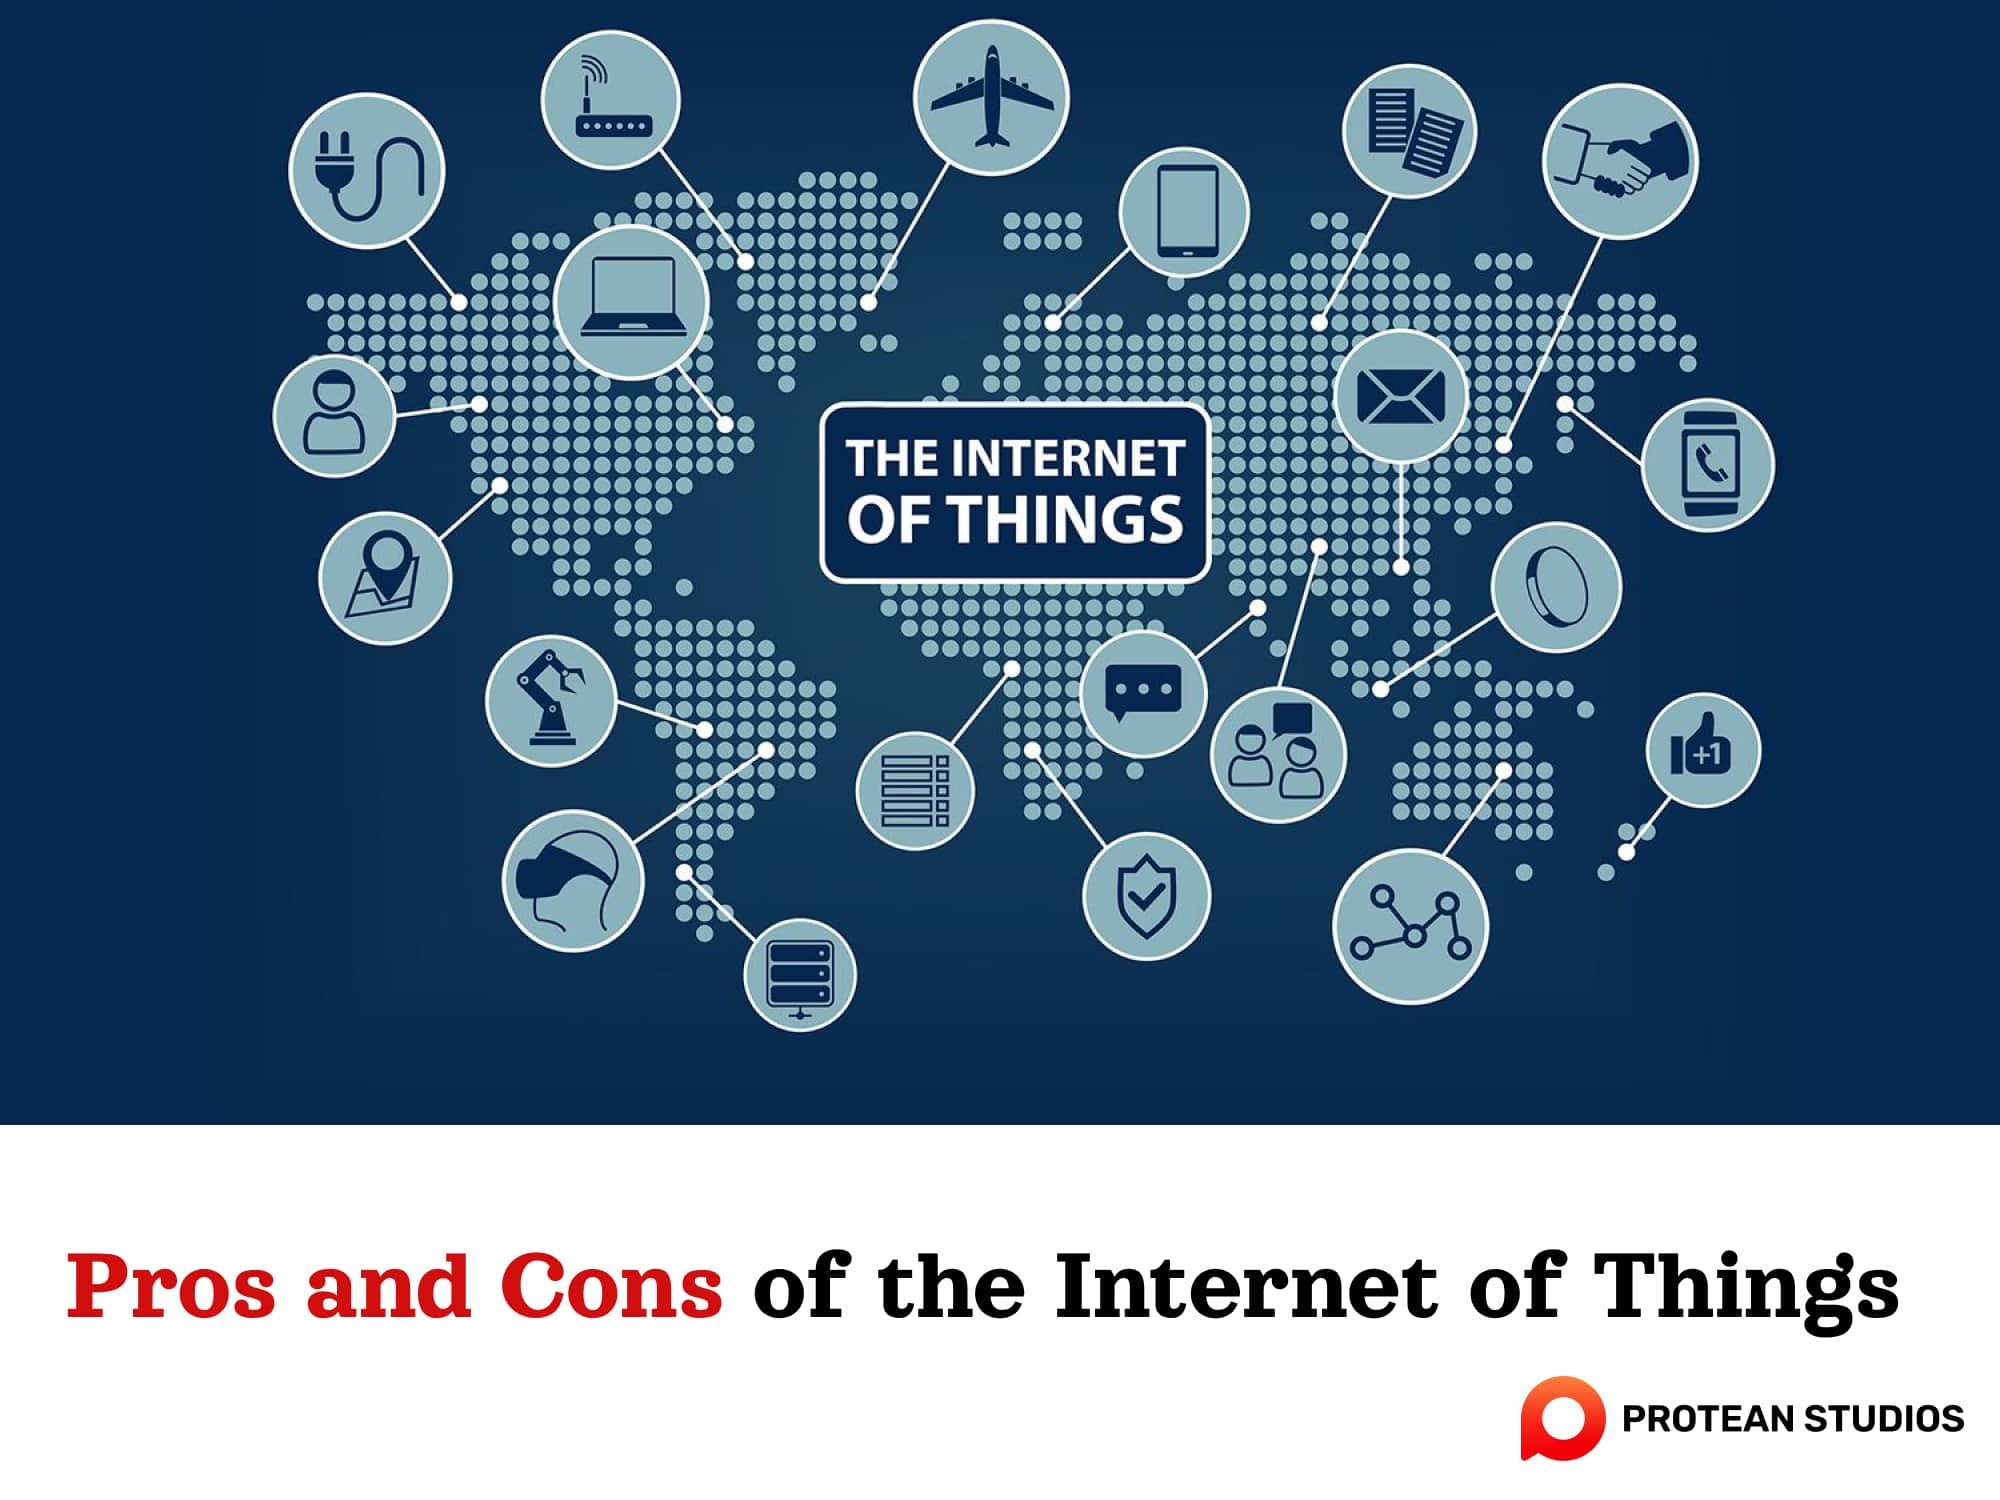 Some benefits and drawbacks of using IoT